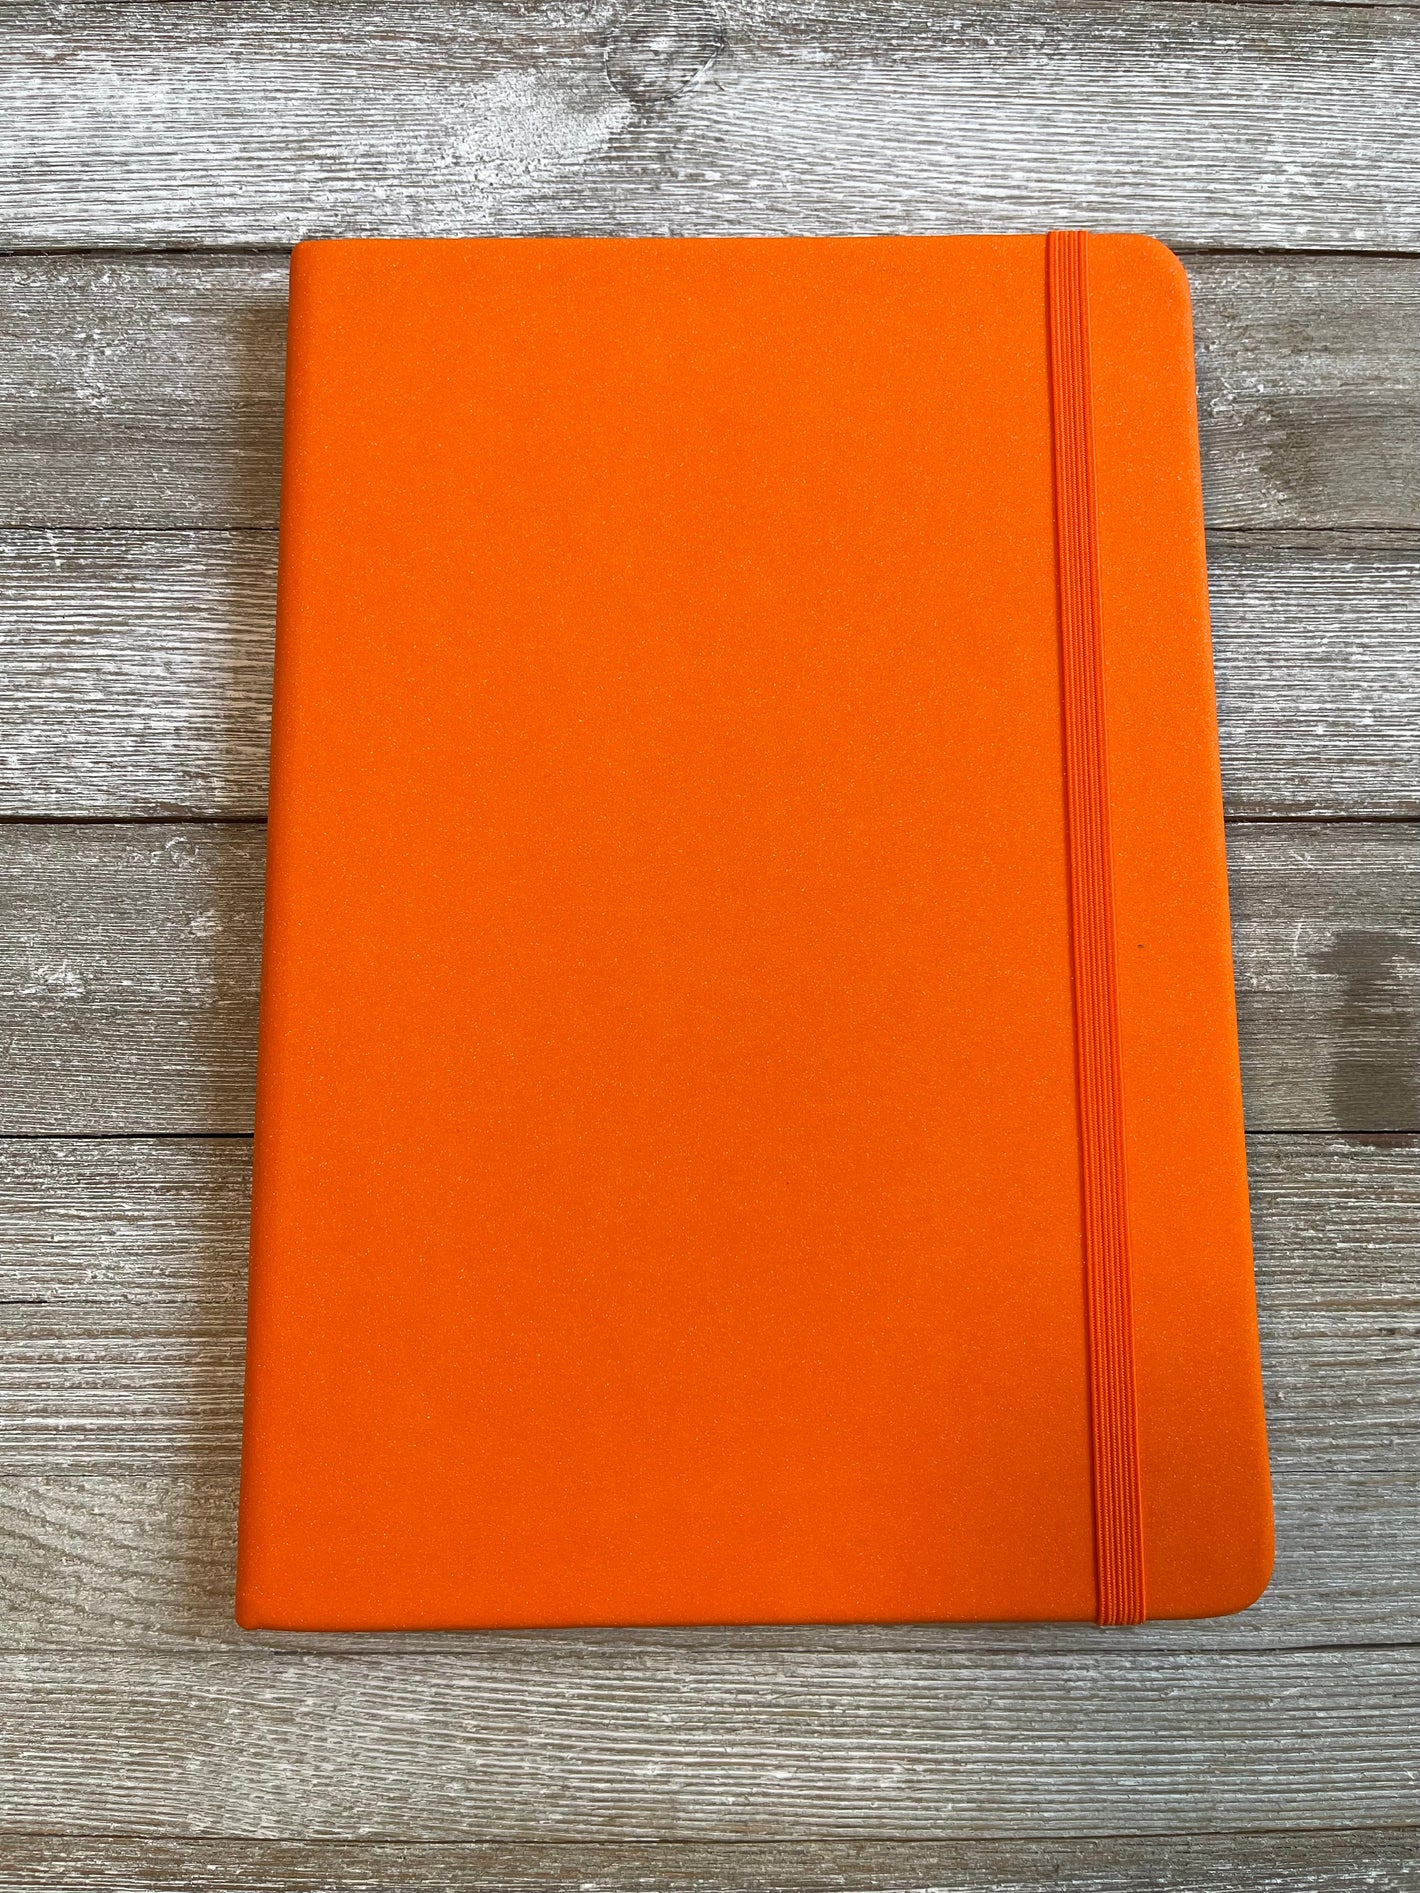 Orange Sparkly Faux Leather Glitter Lined Hardcover Notebook